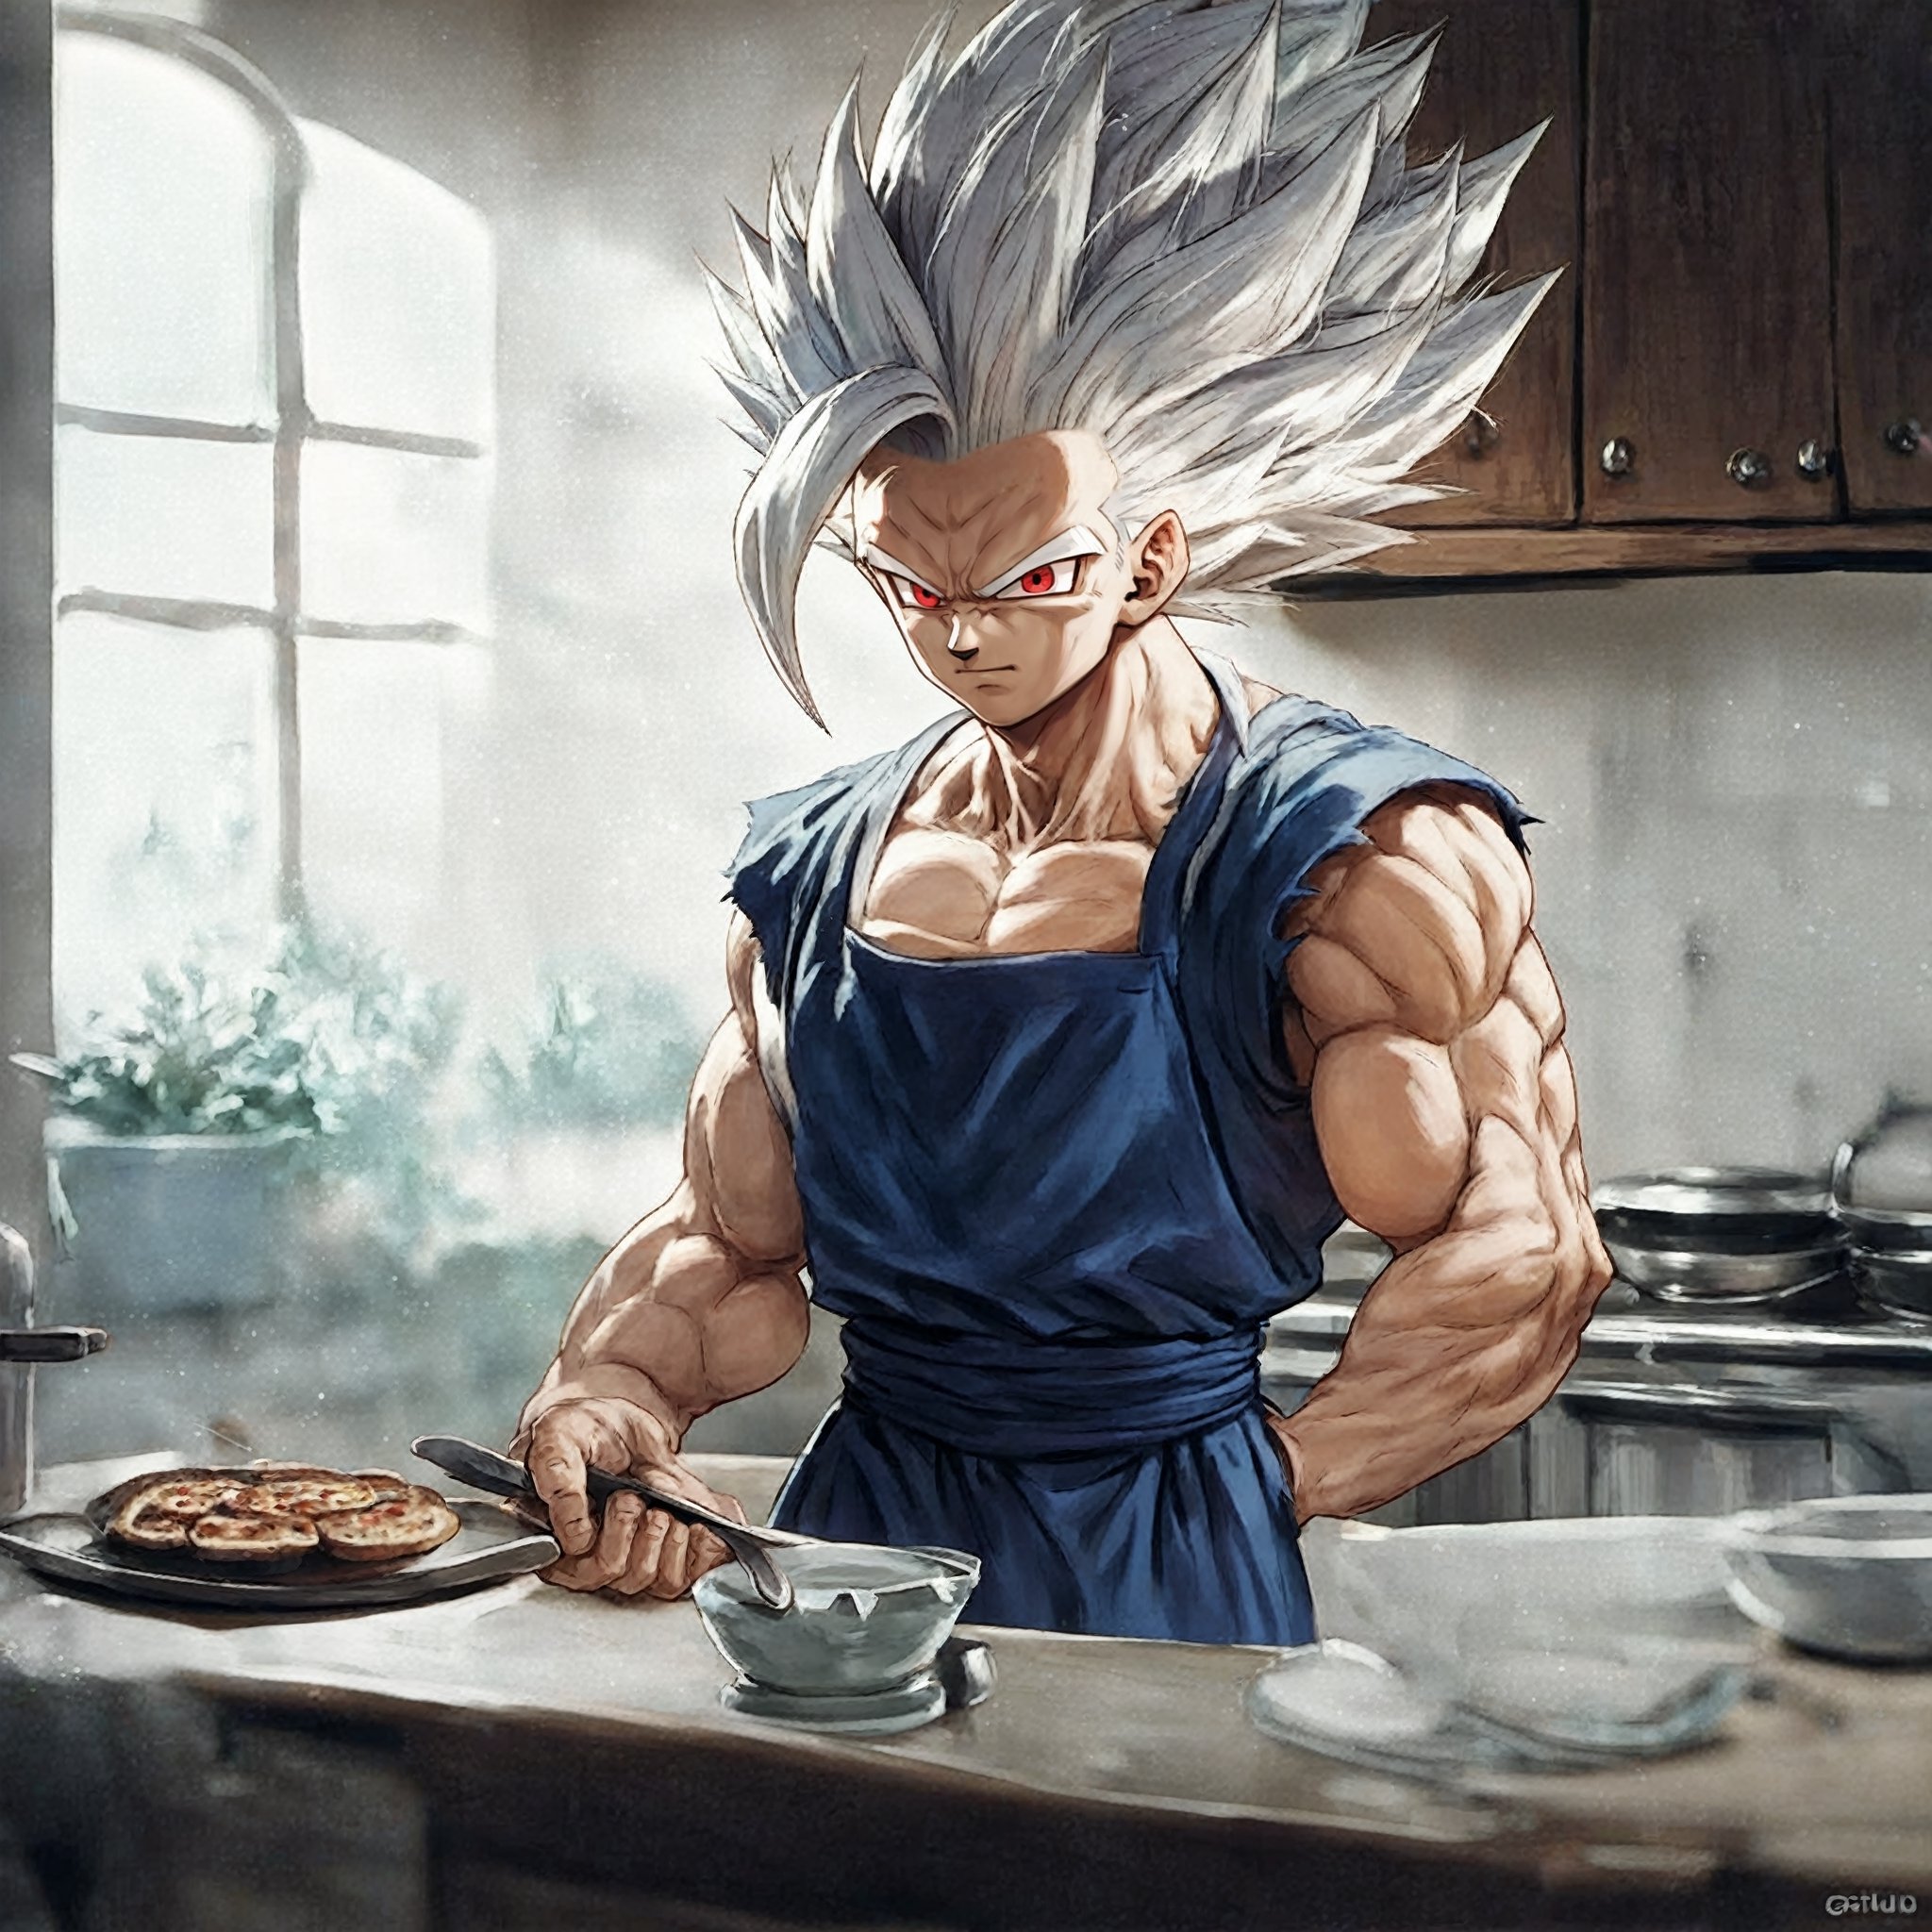 score_9, score_8_up, score_7_up, score_6_up, score_5_up, score_4_up, gohan_beast, red eyes, solo, spiked hair, white hair, apron, kitchen, indoors, rating_safe, source_furry


